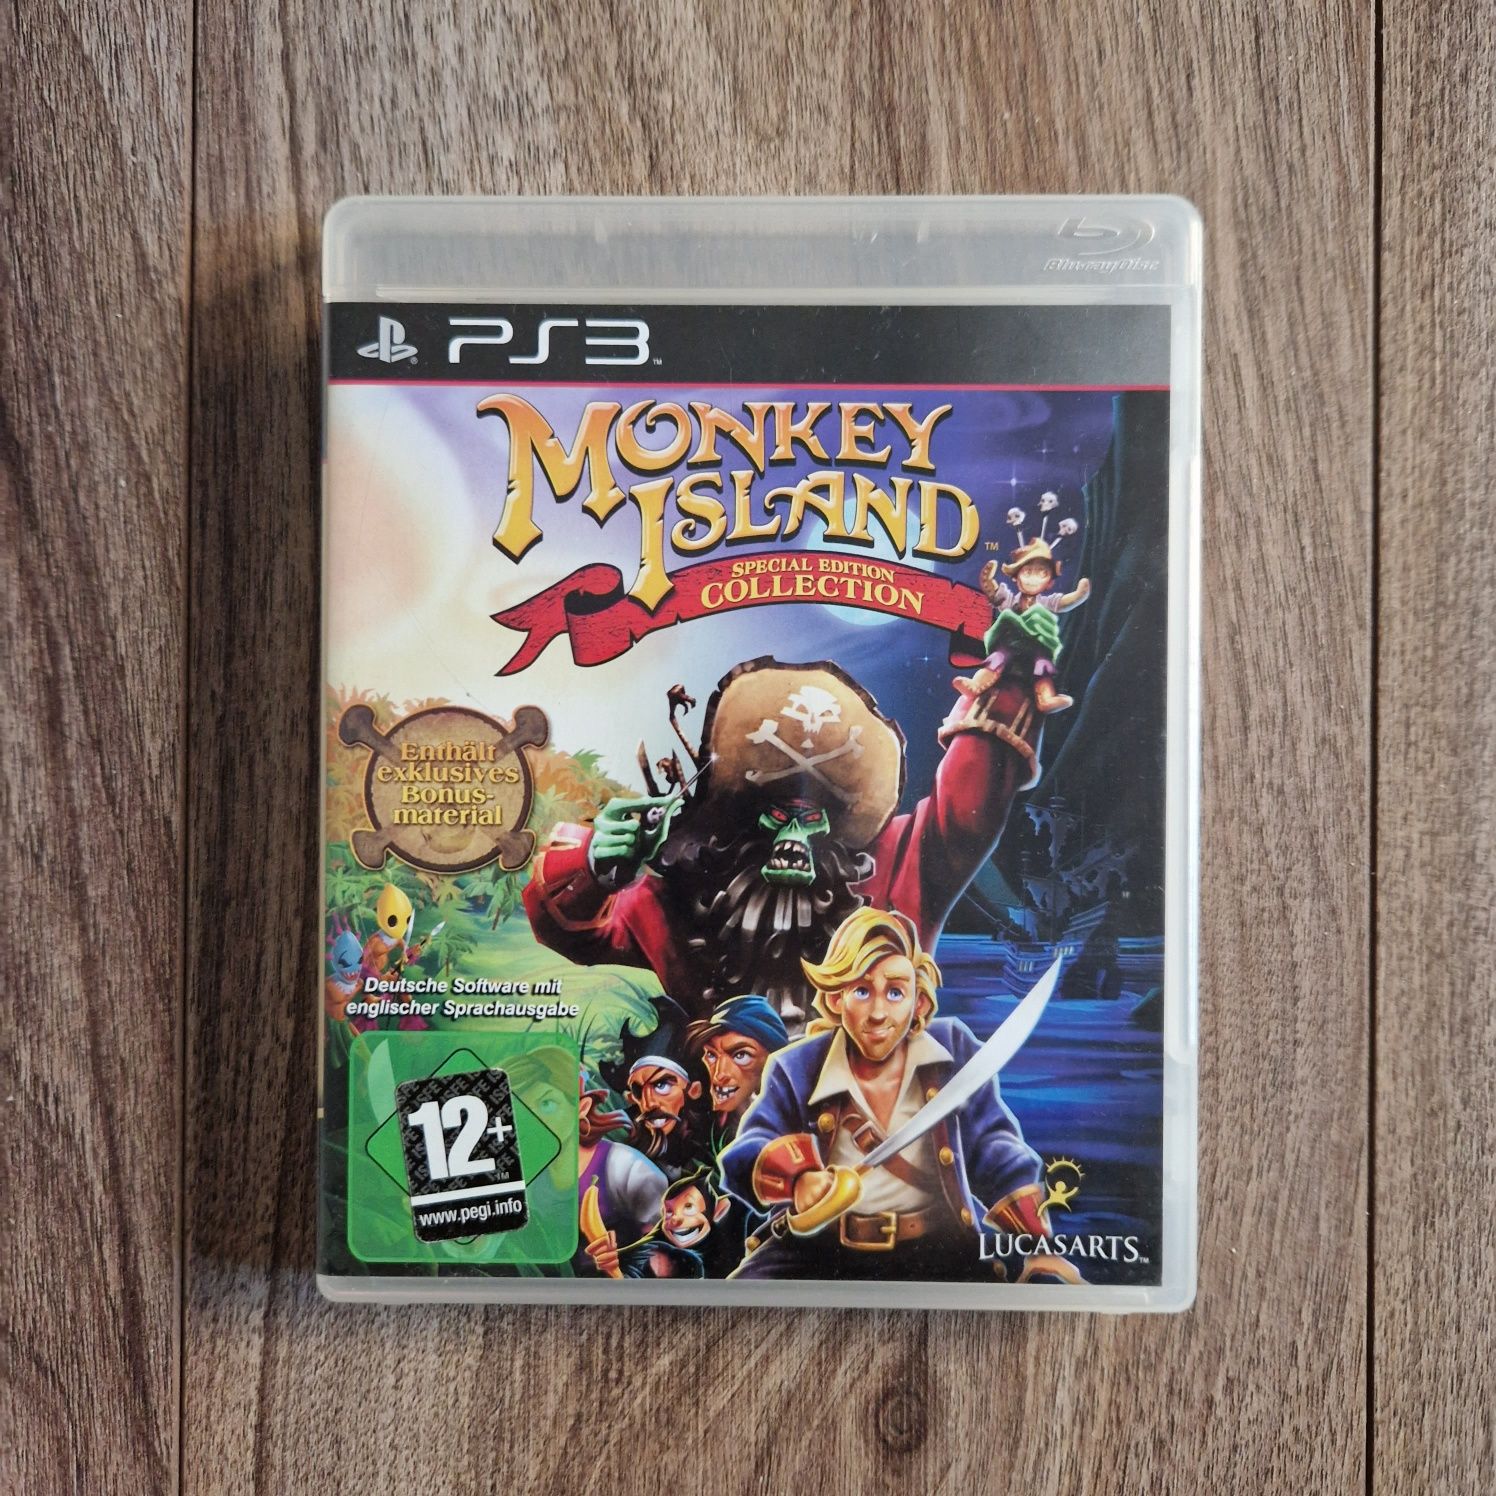 Monkey Island Special Edition Collection - Ps3